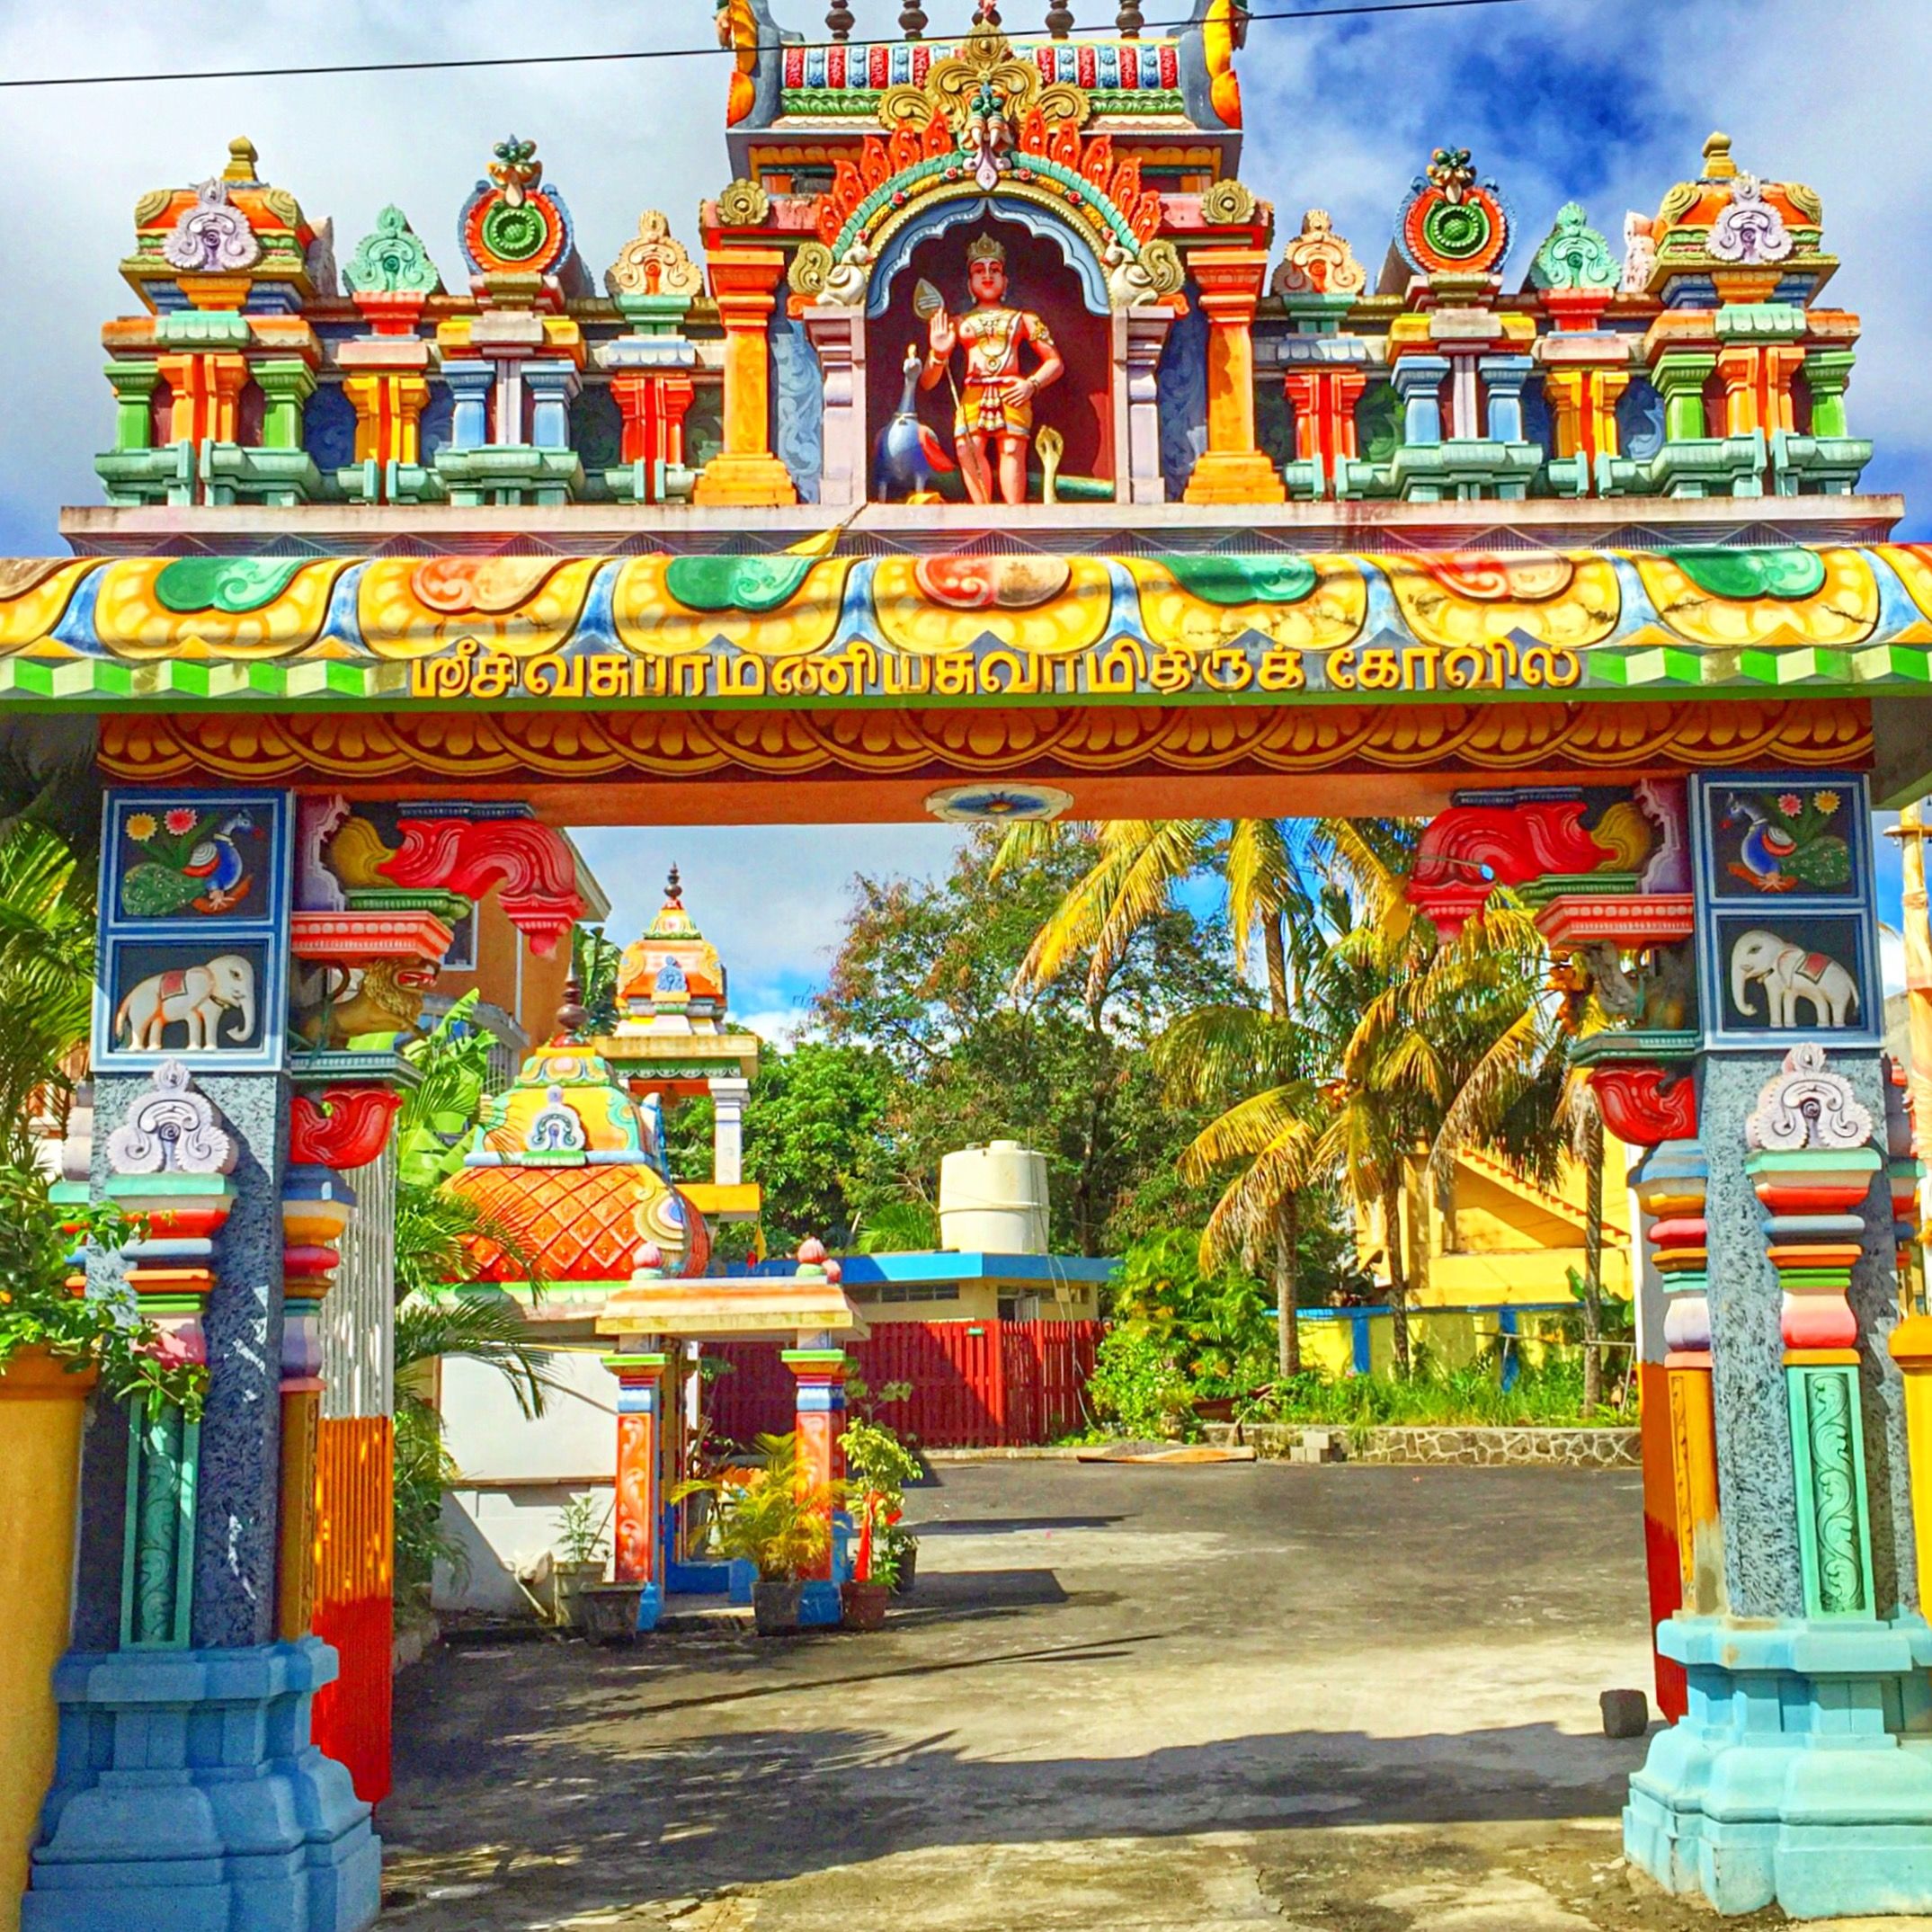 art and craft, art, architecture, creativity, built structure, building exterior, human representation, place of worship, sculpture, statue, religion, spirituality, multi colored, temple - building, sky, animal representation, yellow, low angle view